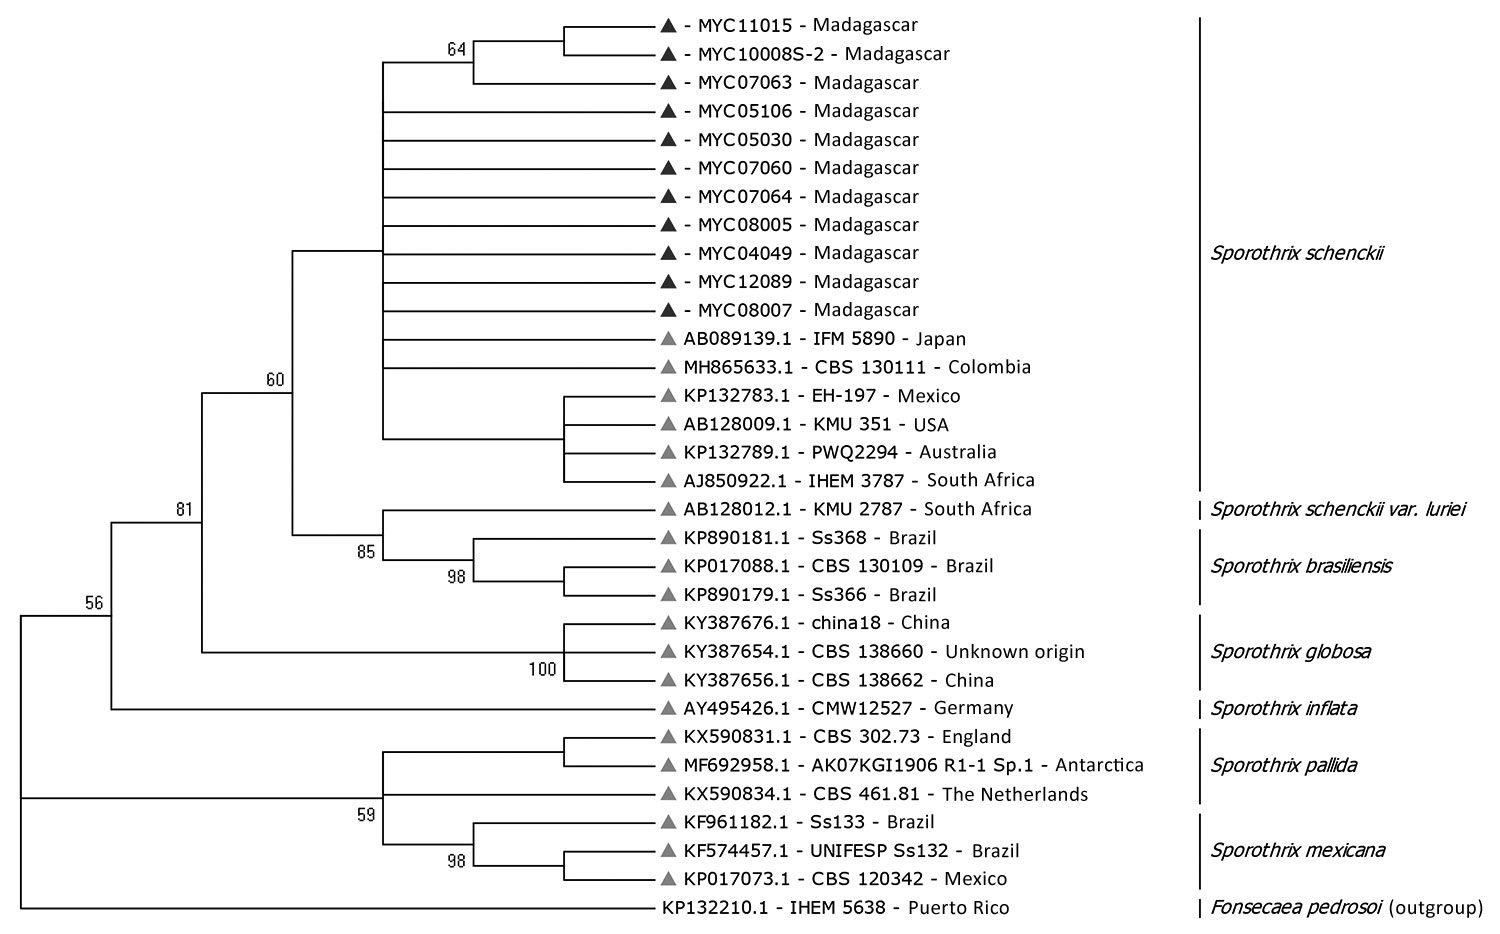 Phylogenetic tree of internal transcribed spacer sequences of Sporothrix schenckii isolates from patients with sporotrichosis, Madagascar, March 2013–June 2017 (black triangles), and reference isolates (gray triangles). Fonsecaea pedrosoi was considered to be out of group. The tree was built by using MEGA7.0 software (https://www.megasoftware.net) and applying the maximum-likelihood method based on the Kimura 2-parameter model (100 bootstrap replicates). Strains are detailed in Appendix 1 Table 